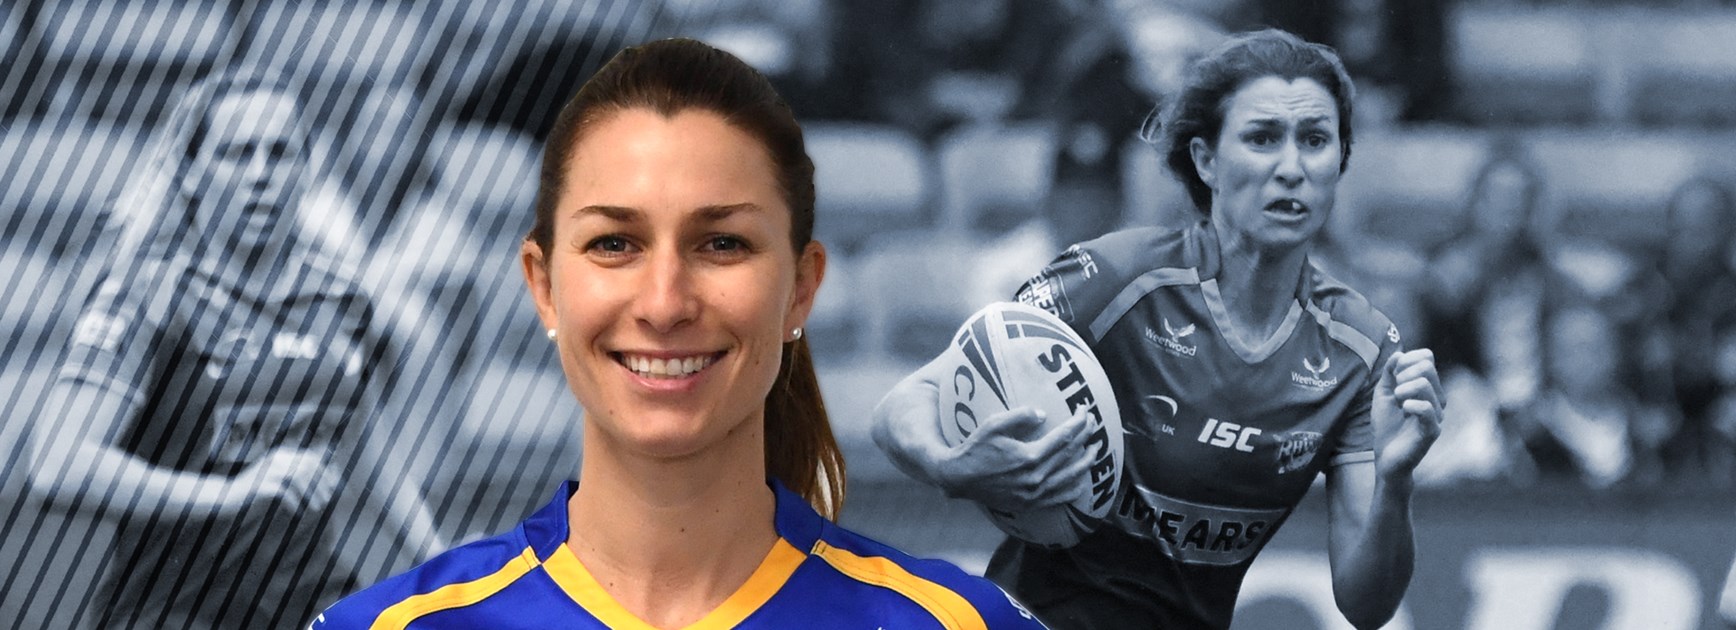 Woman of Steel to represent Roosters at NRL Nines